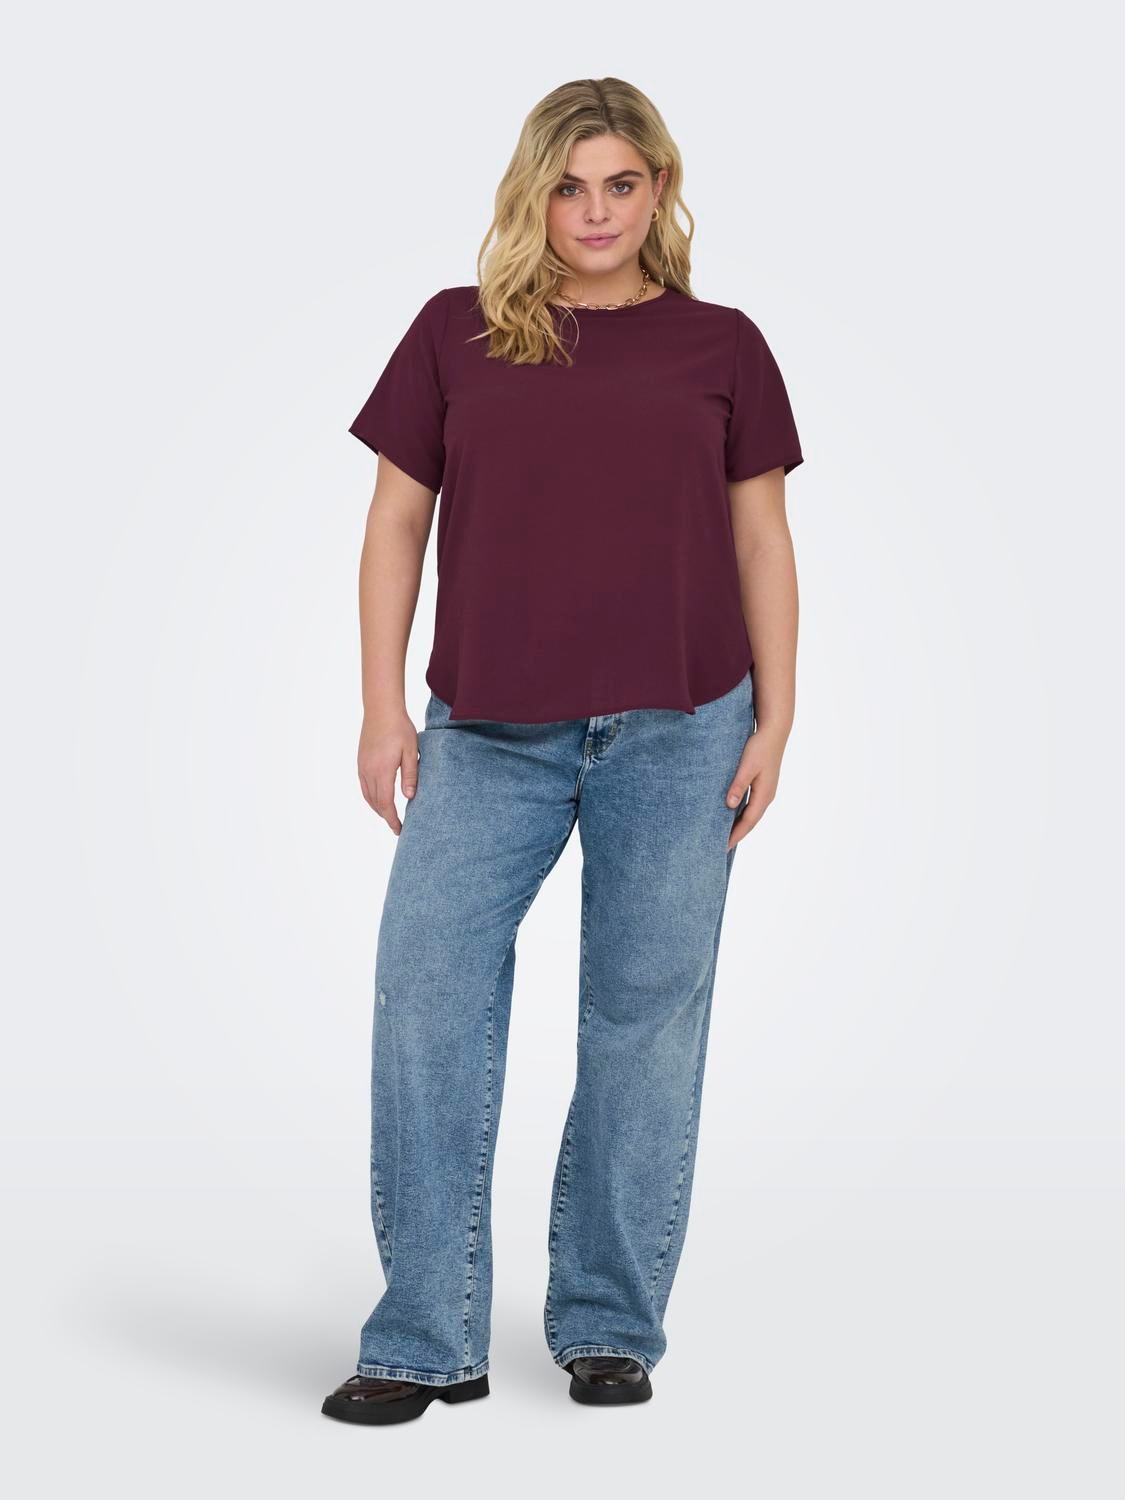 ONLY Curvy short sleeve Top -Port Royale - 15218353